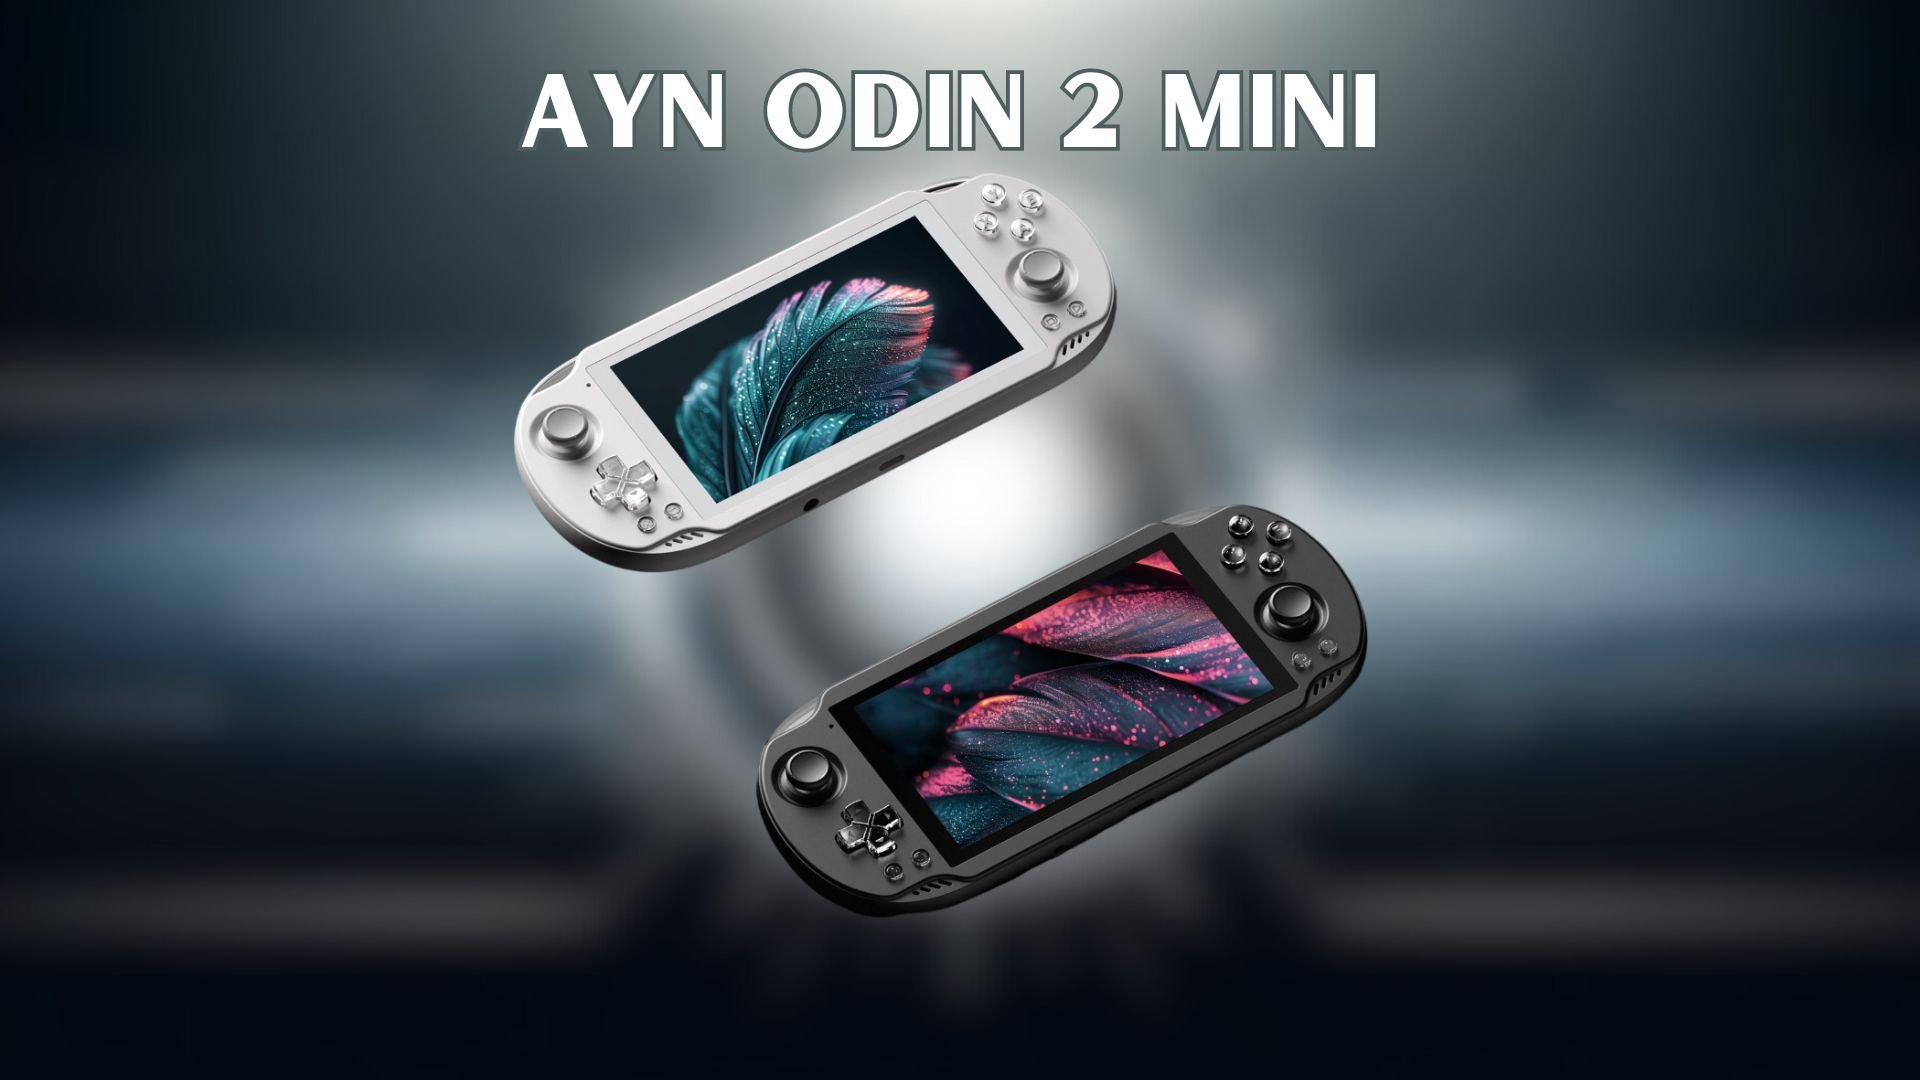 All we know on the AYN Odin 2 Mini